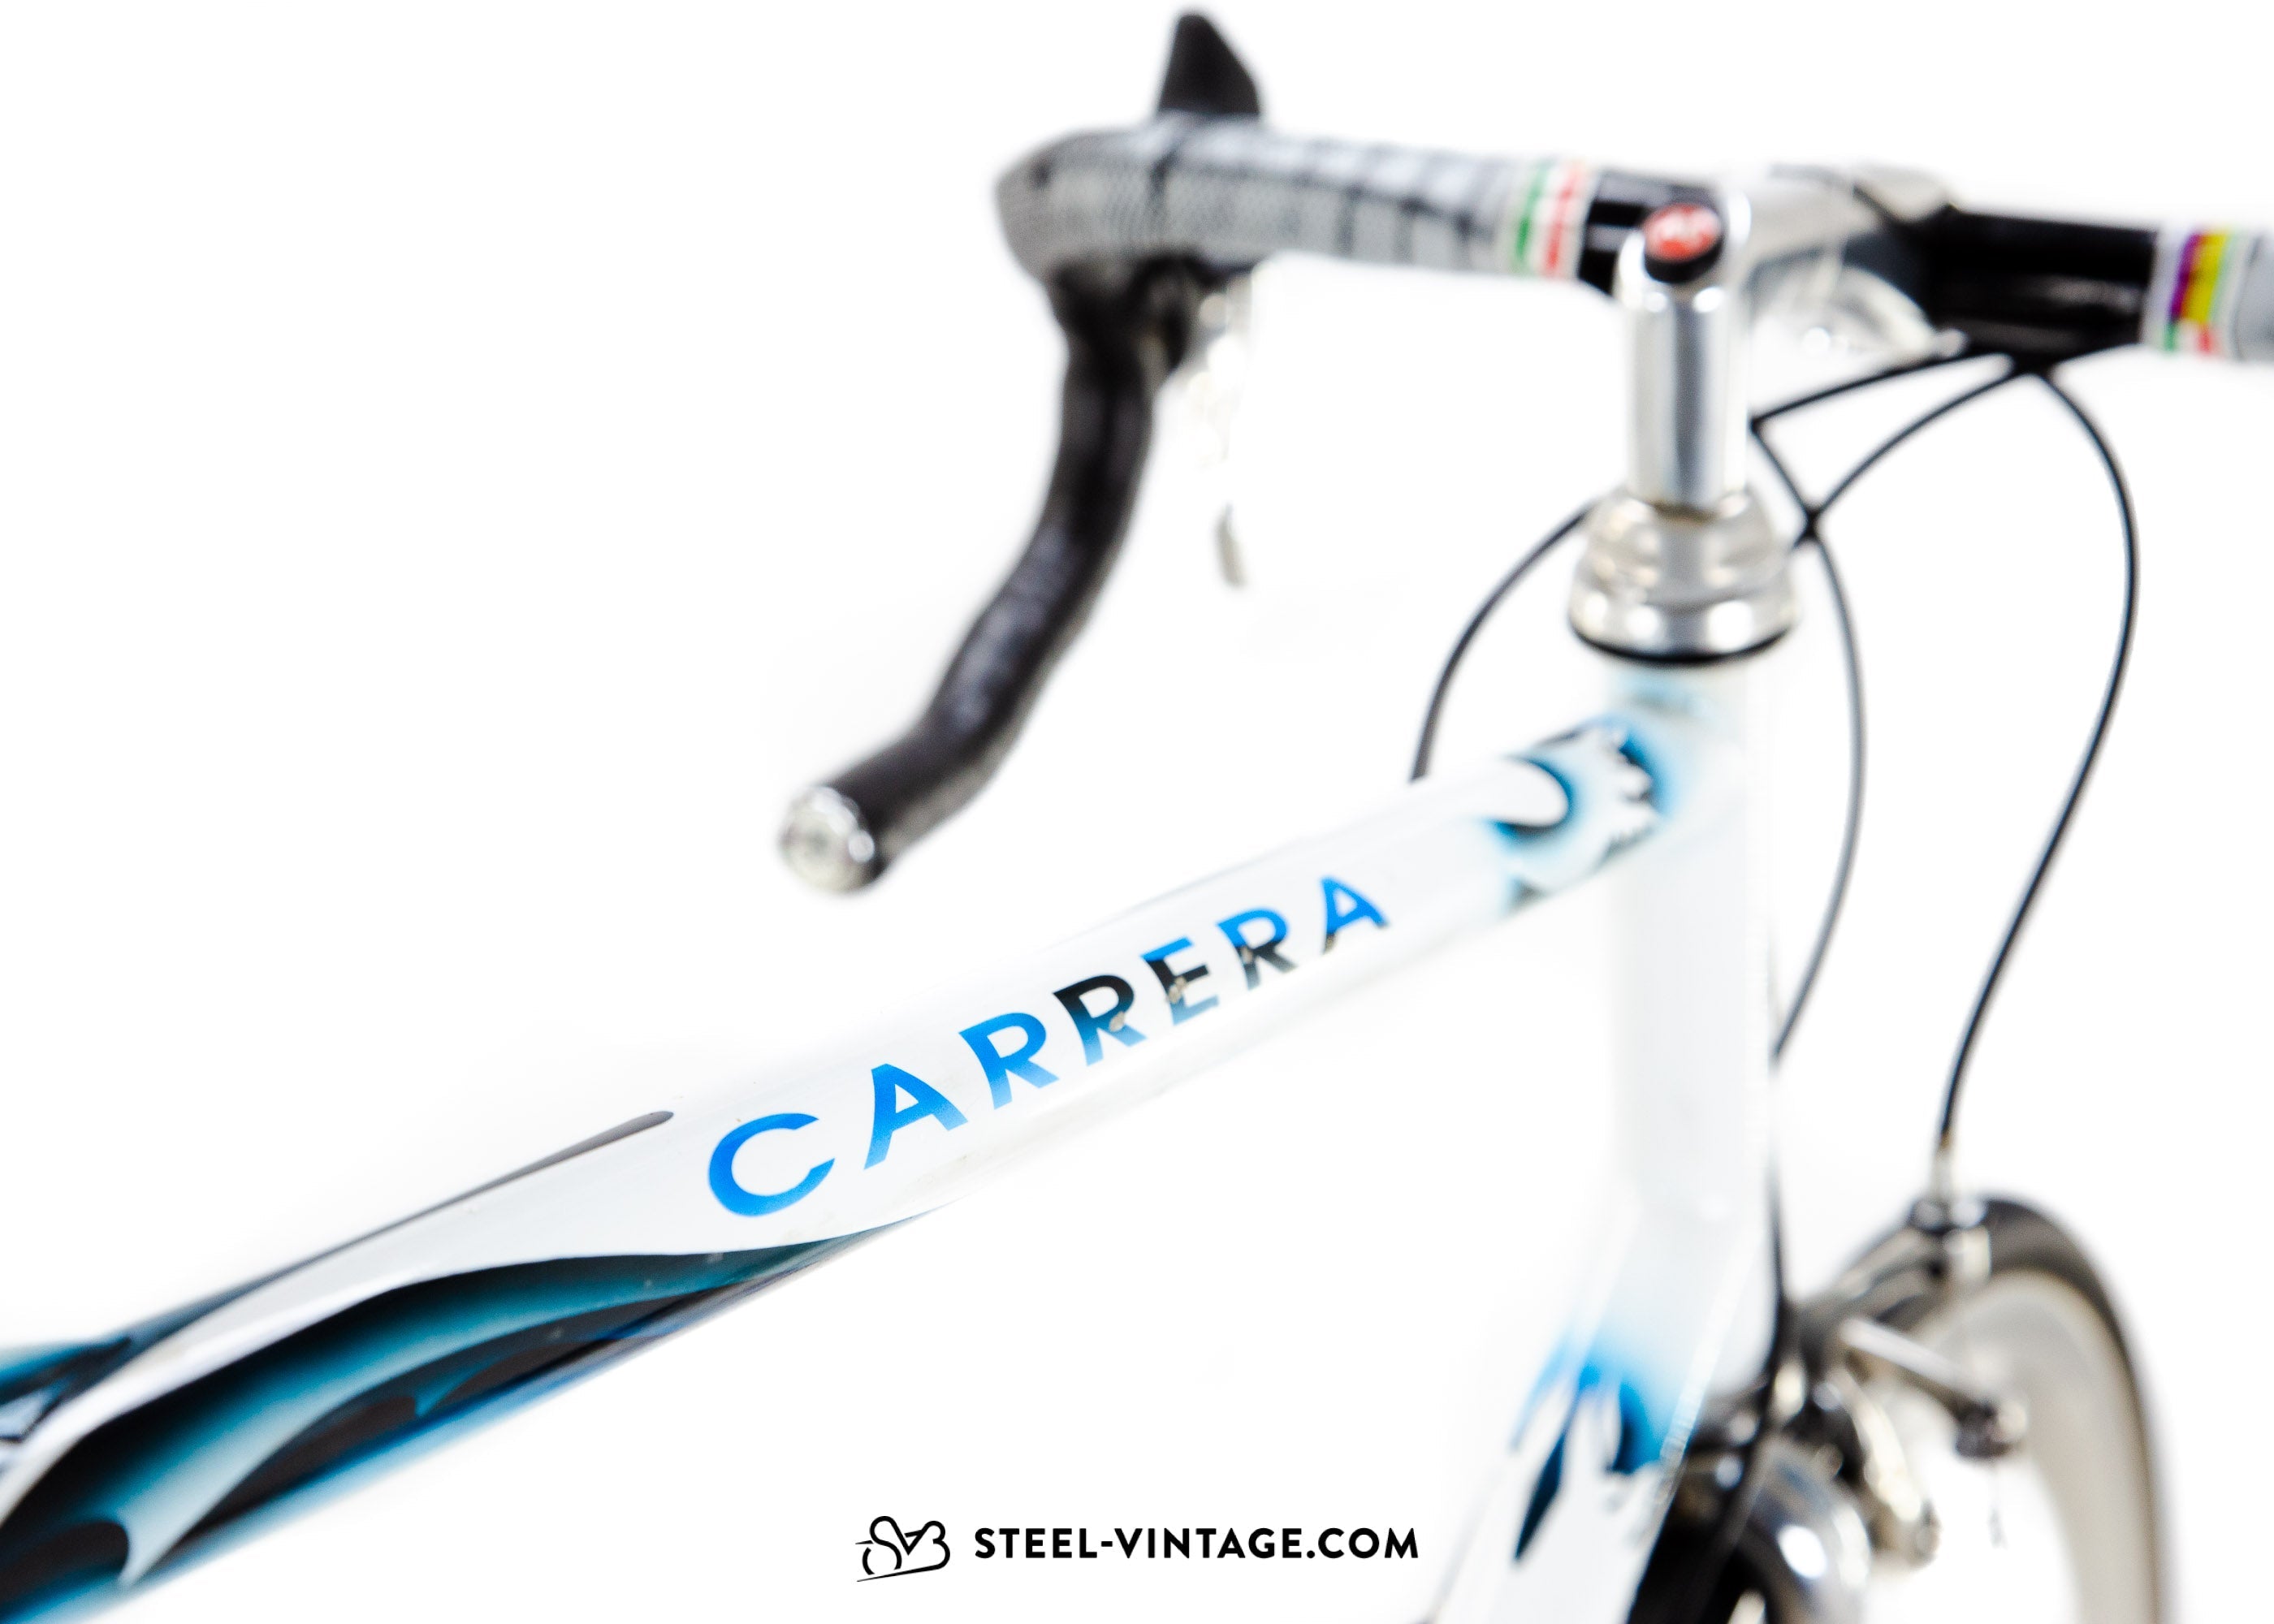 Carrera Bicycle – The True Cycling Experience